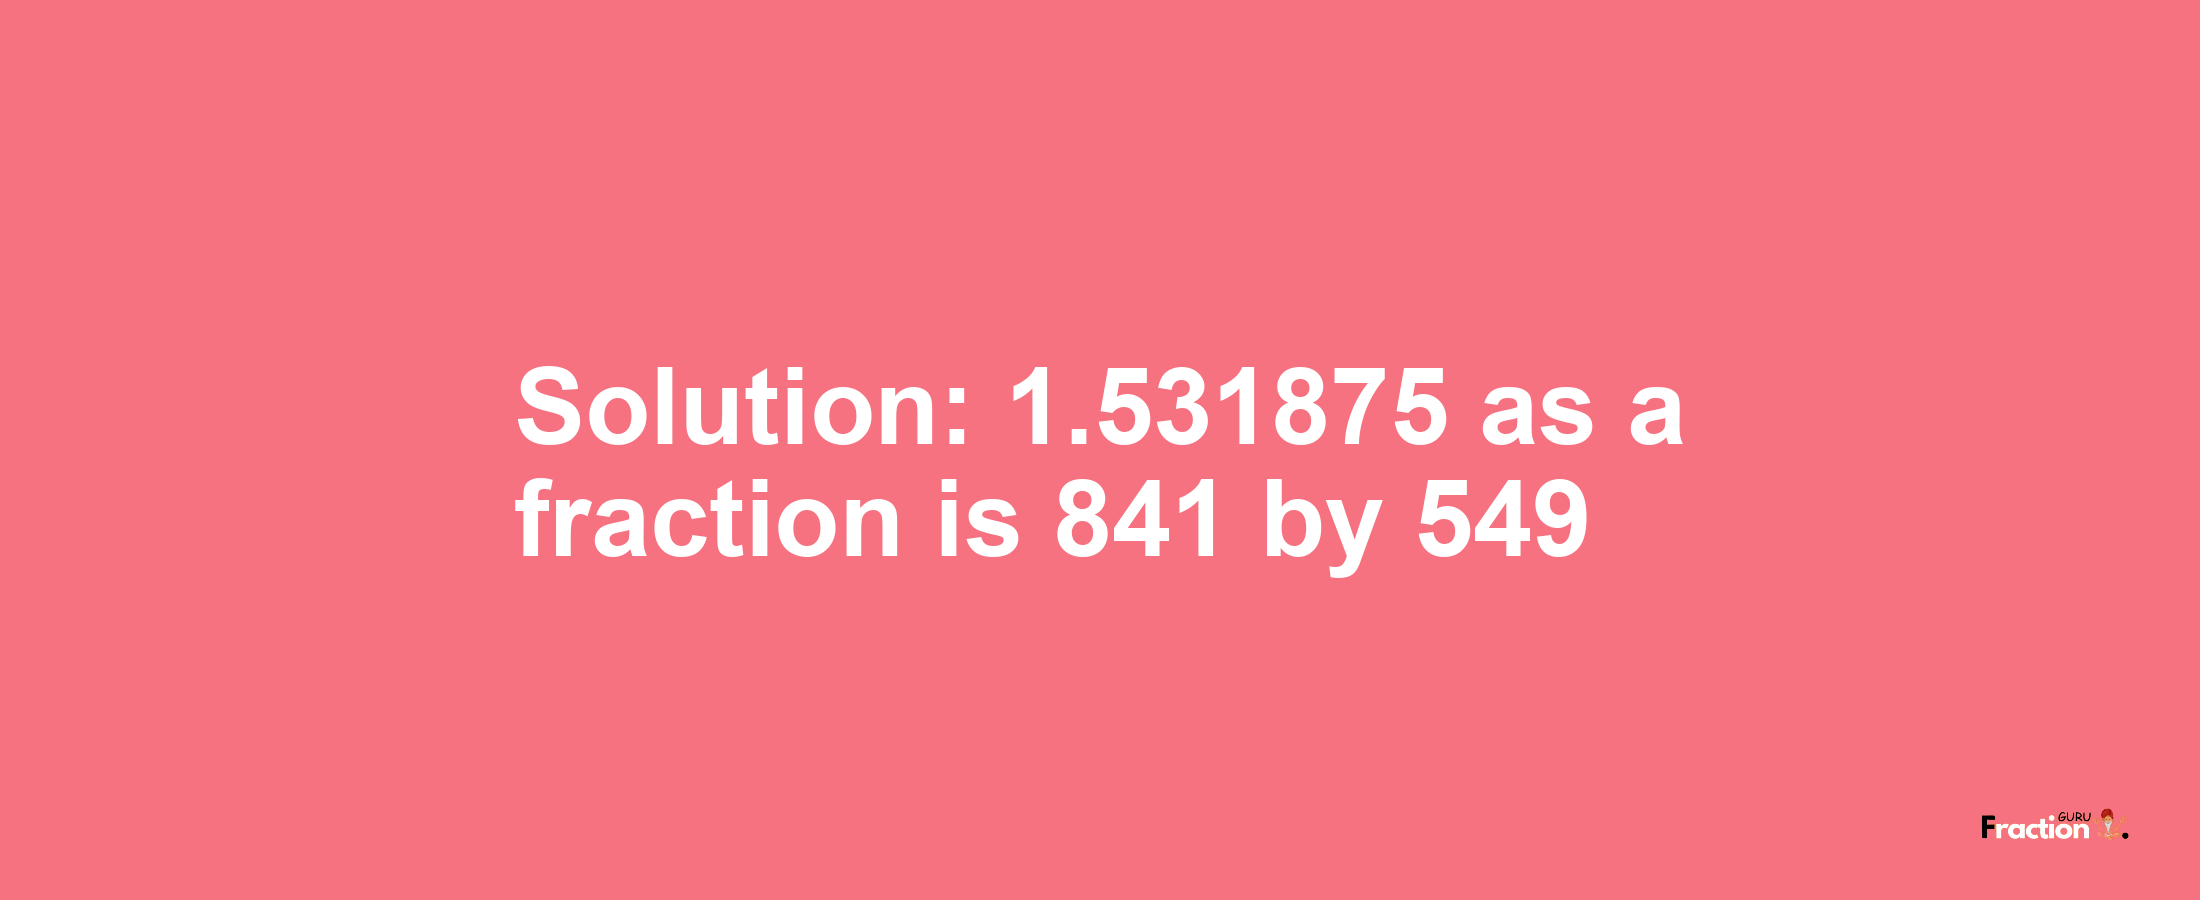 Solution:1.531875 as a fraction is 841/549